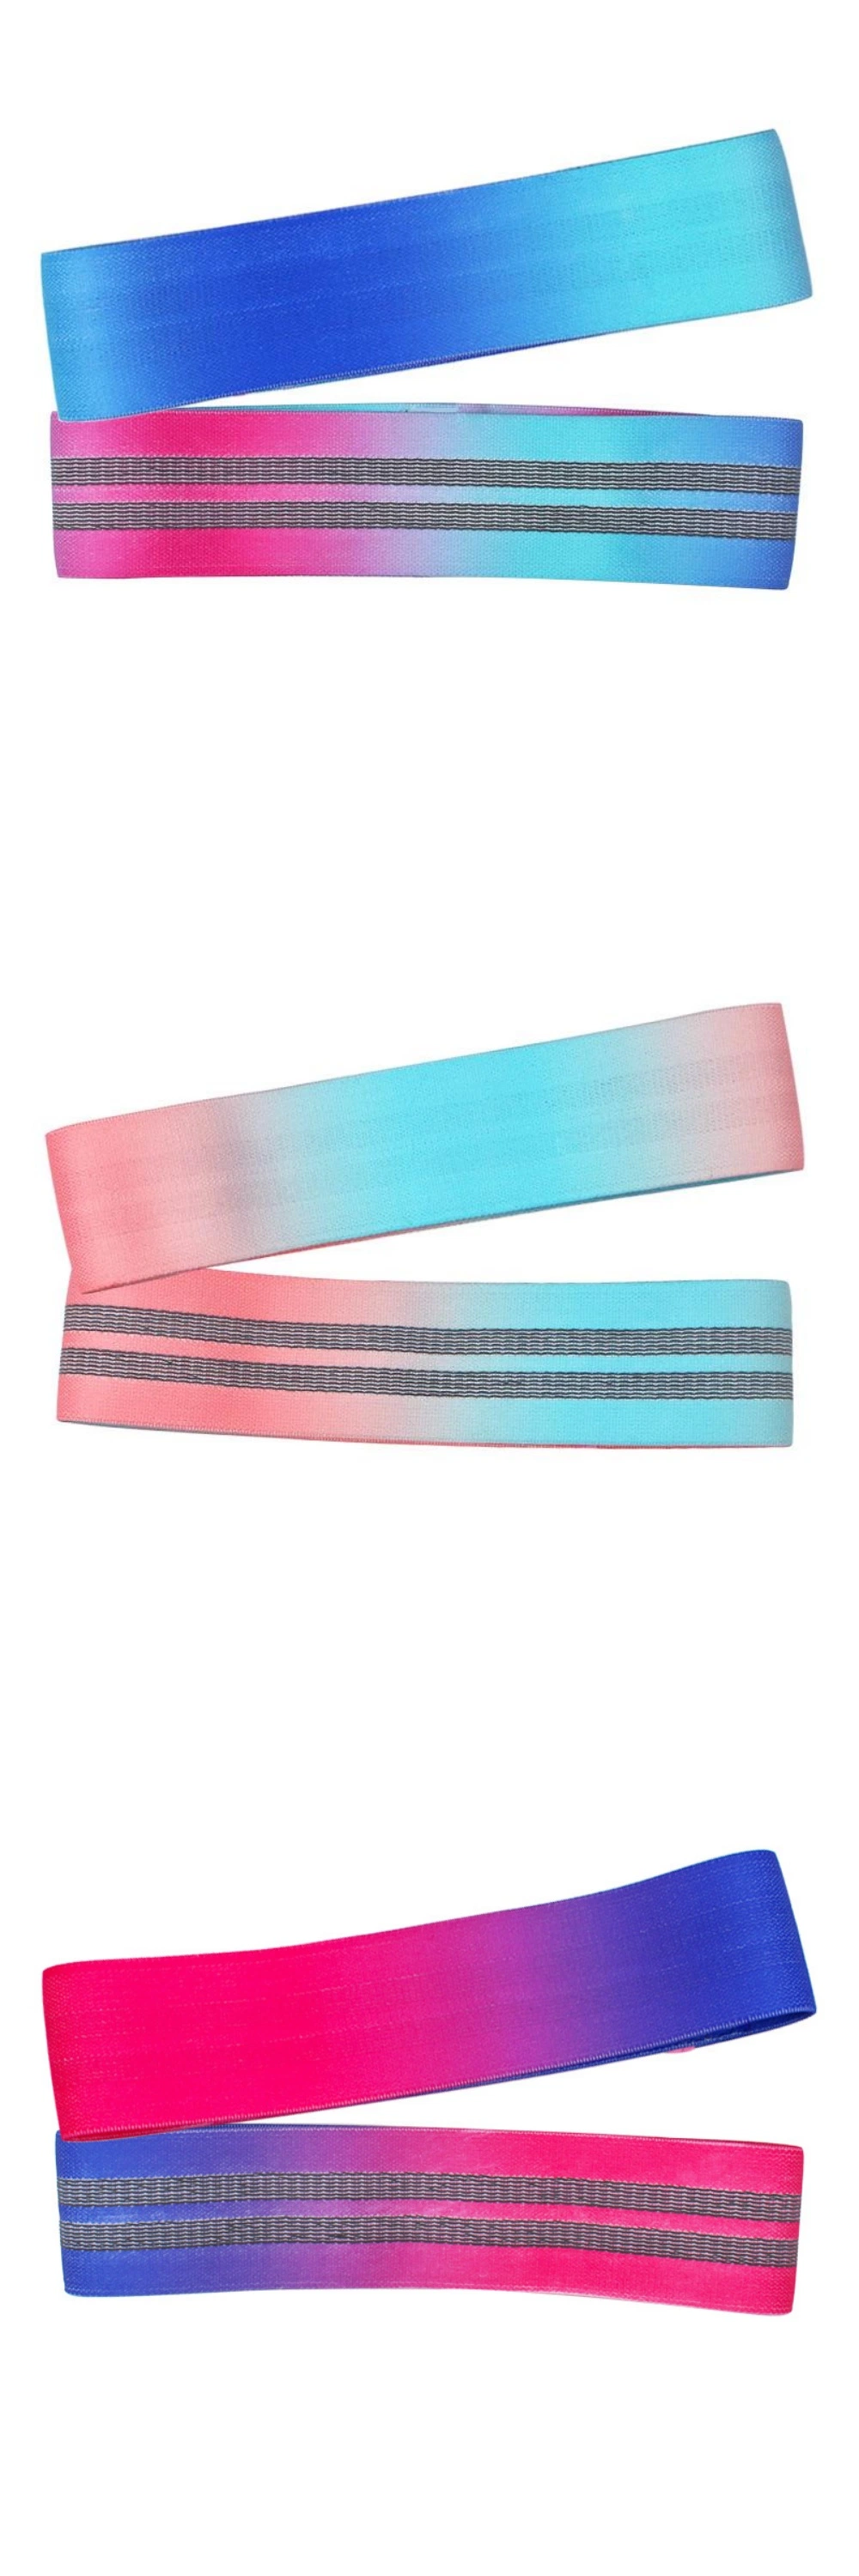 Rainbow Resistance Bands for Working out - Booty Bands for Women